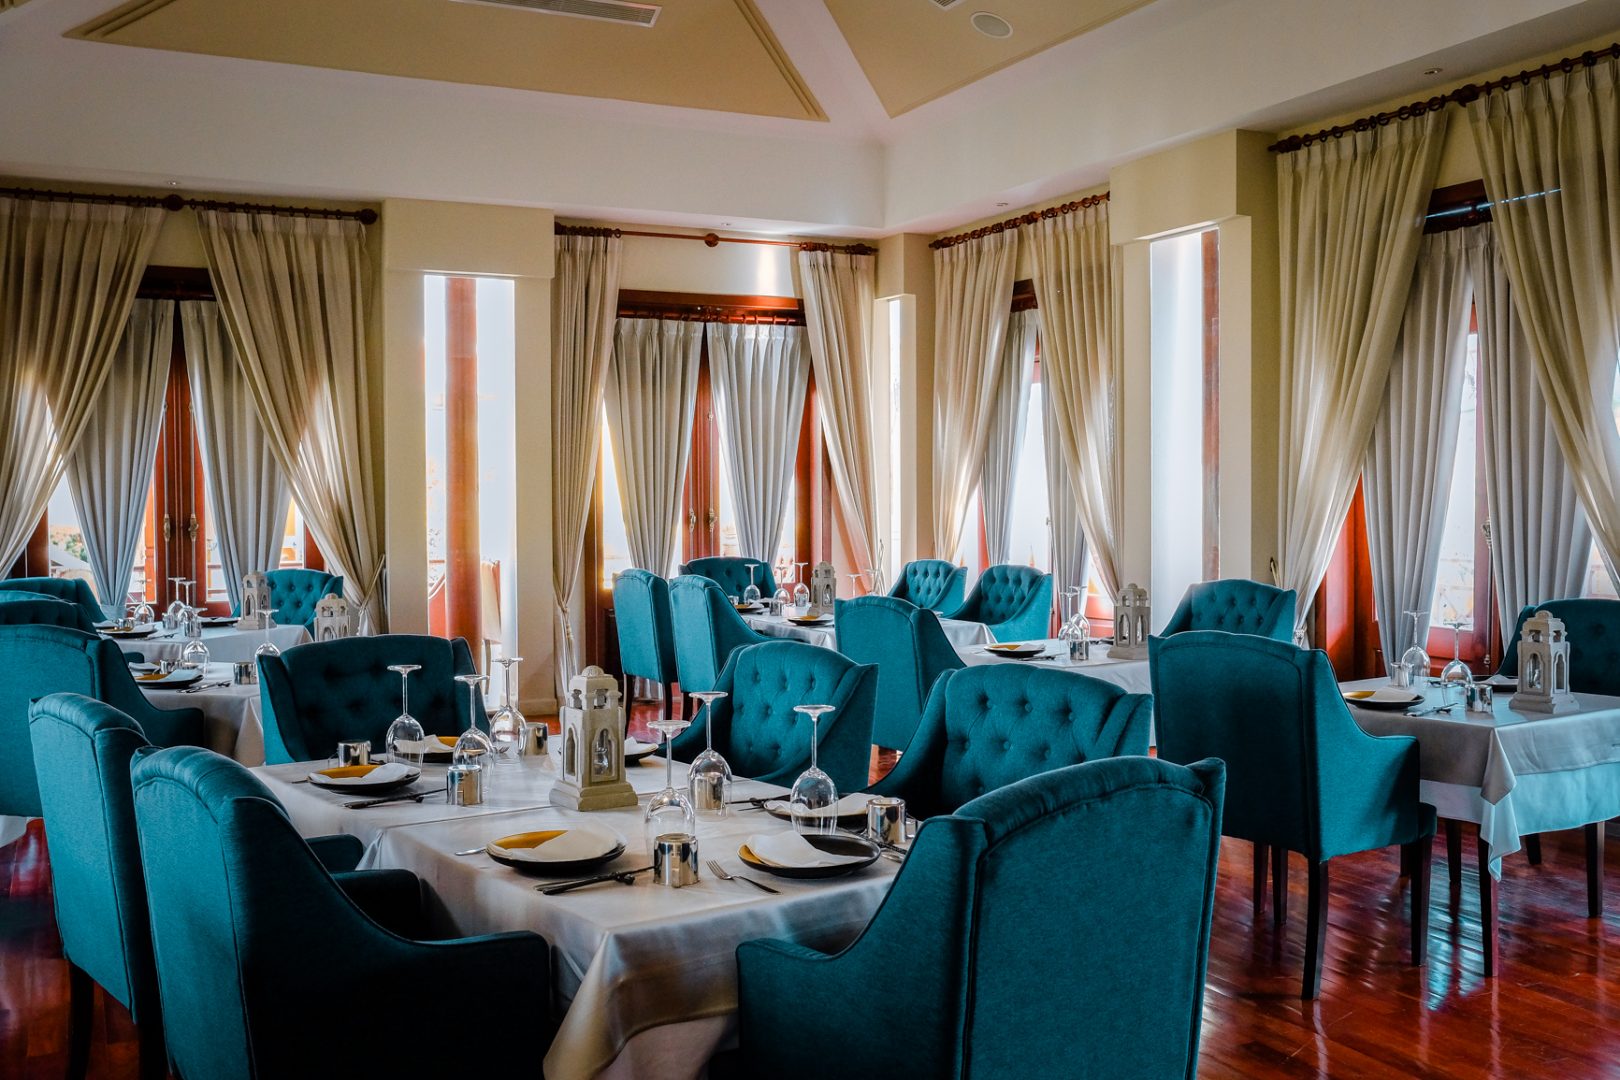 The Stage 1960s: Taste the History at Memoire Palace Resort and Spa